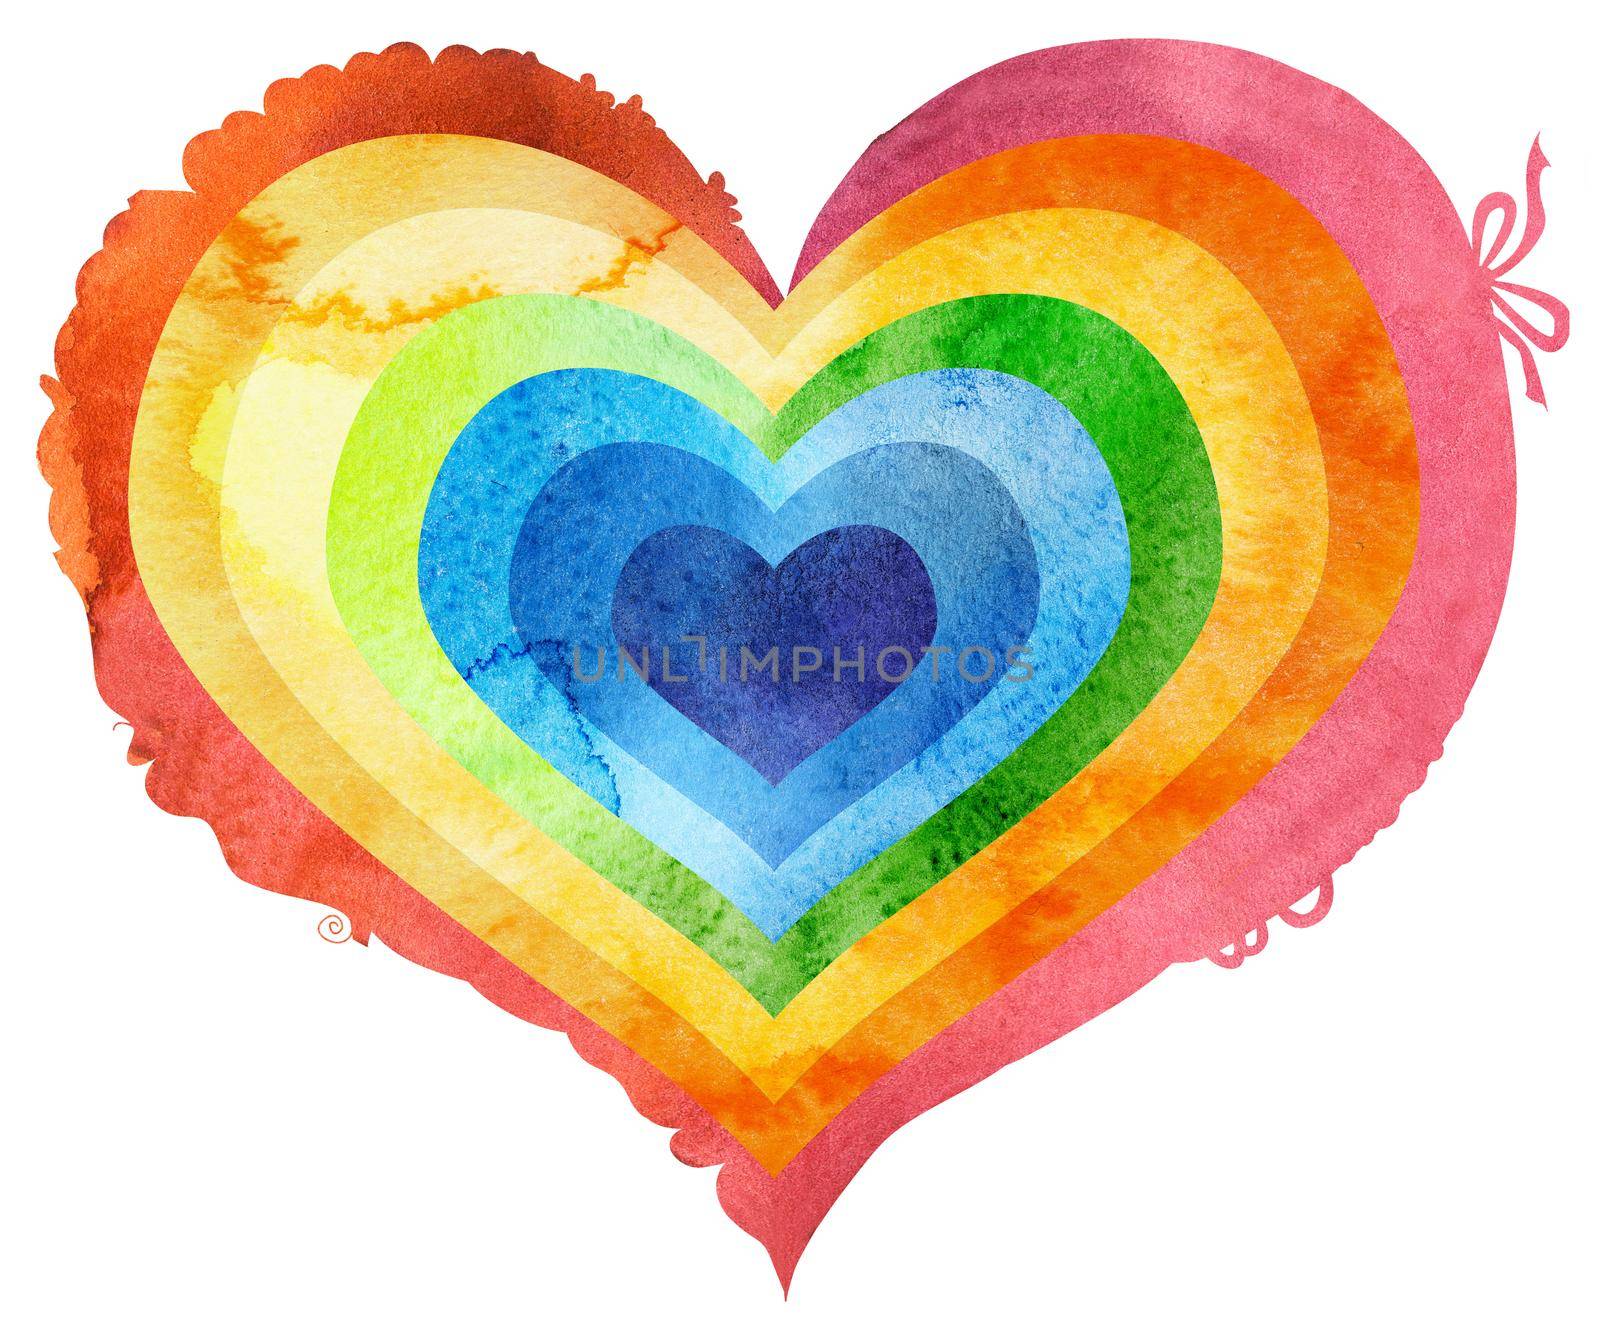 Watercolor textured rainbow heart with a lace edge by NataOmsk